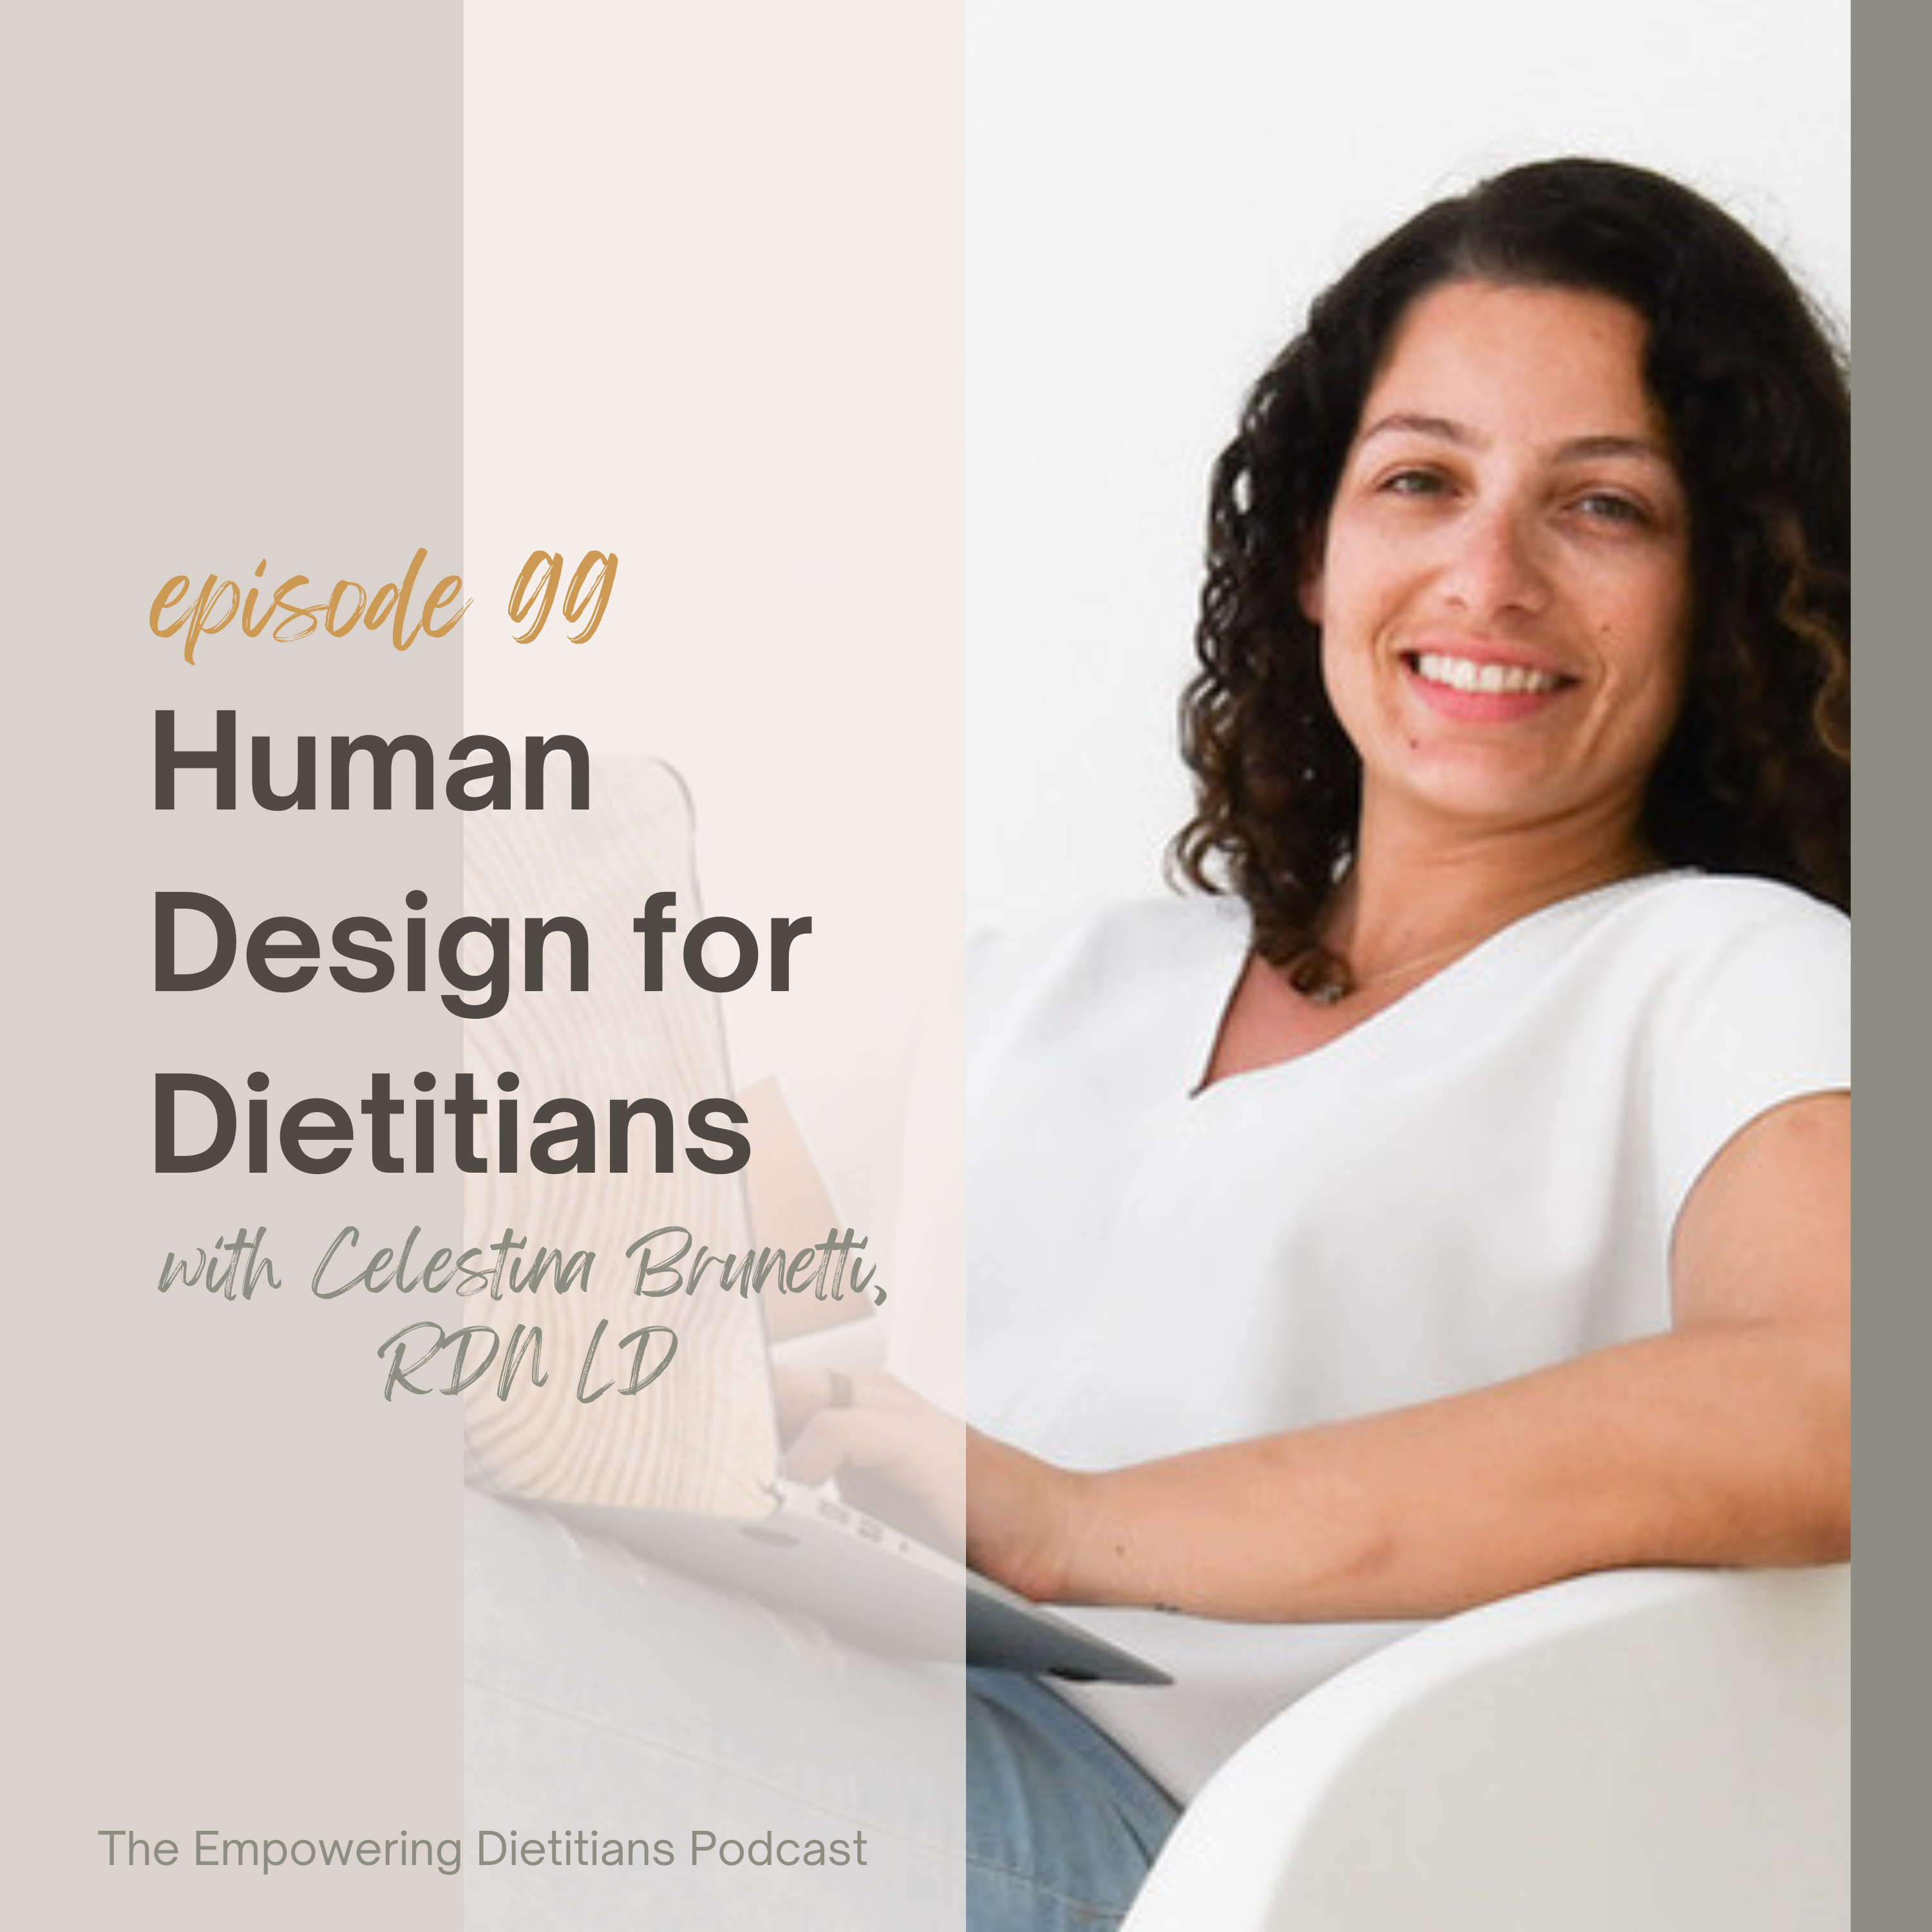 human design for dietitians with celestina brunetti